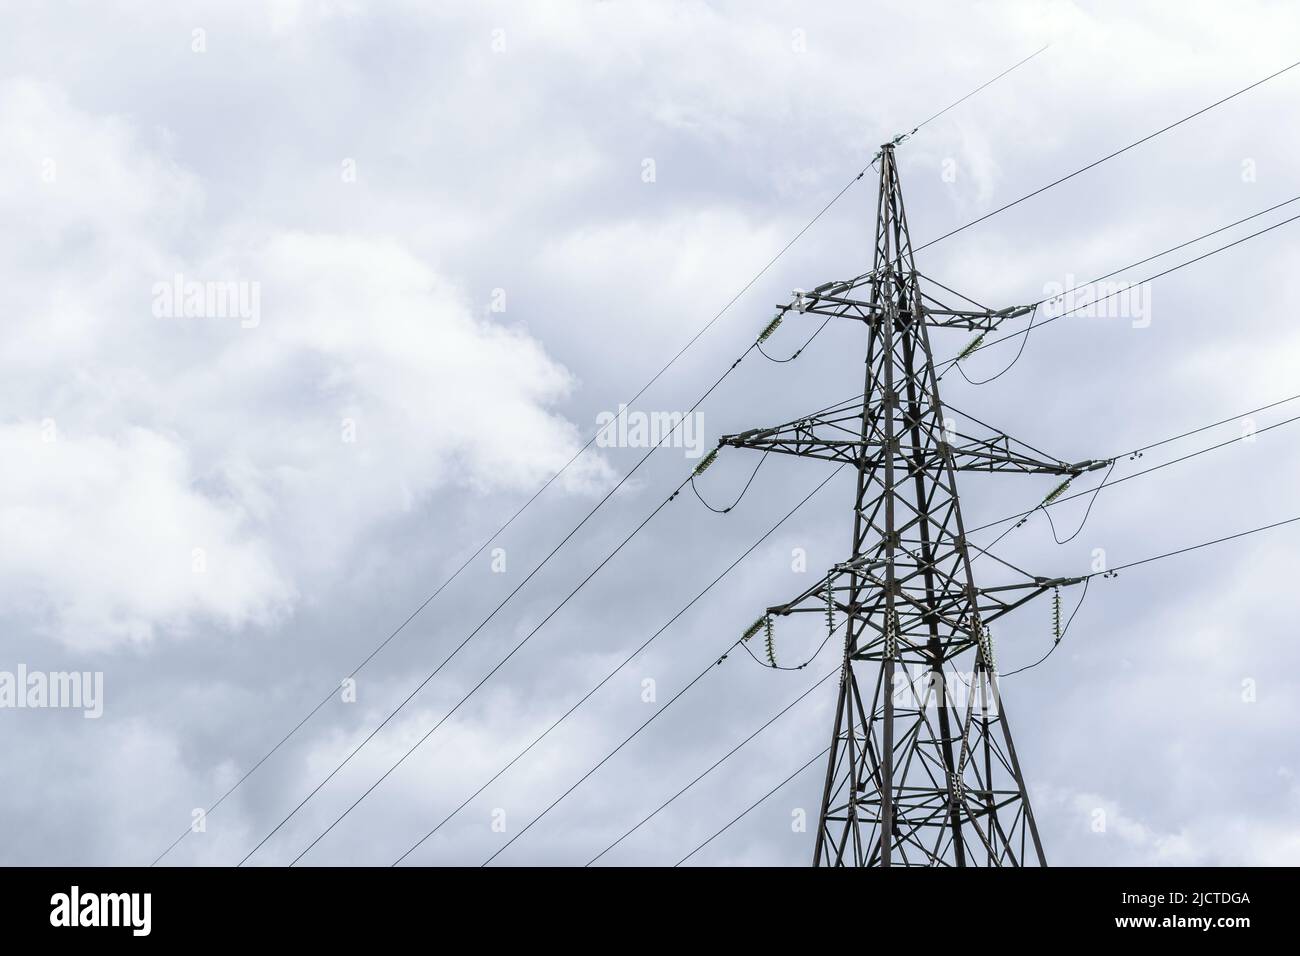 View of a high-voltage overhead power line. Electricity pole on a power line. Stock Photo